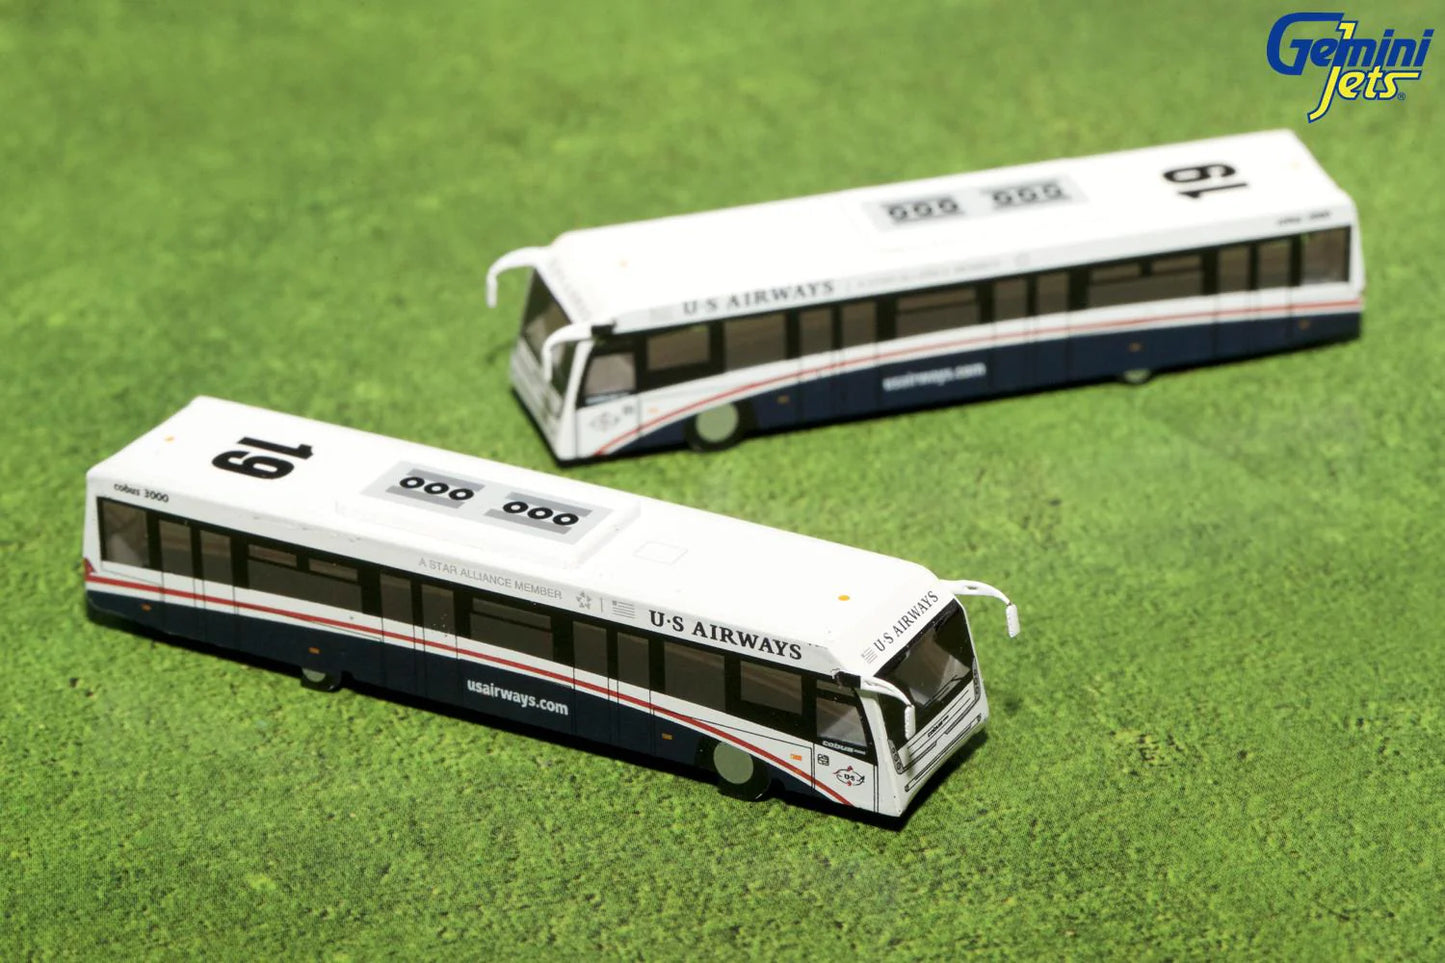 New Mold! US Airways Cobus 3000 Set of 2 Buses G2USA573 Die-Cast 1:200 Scale